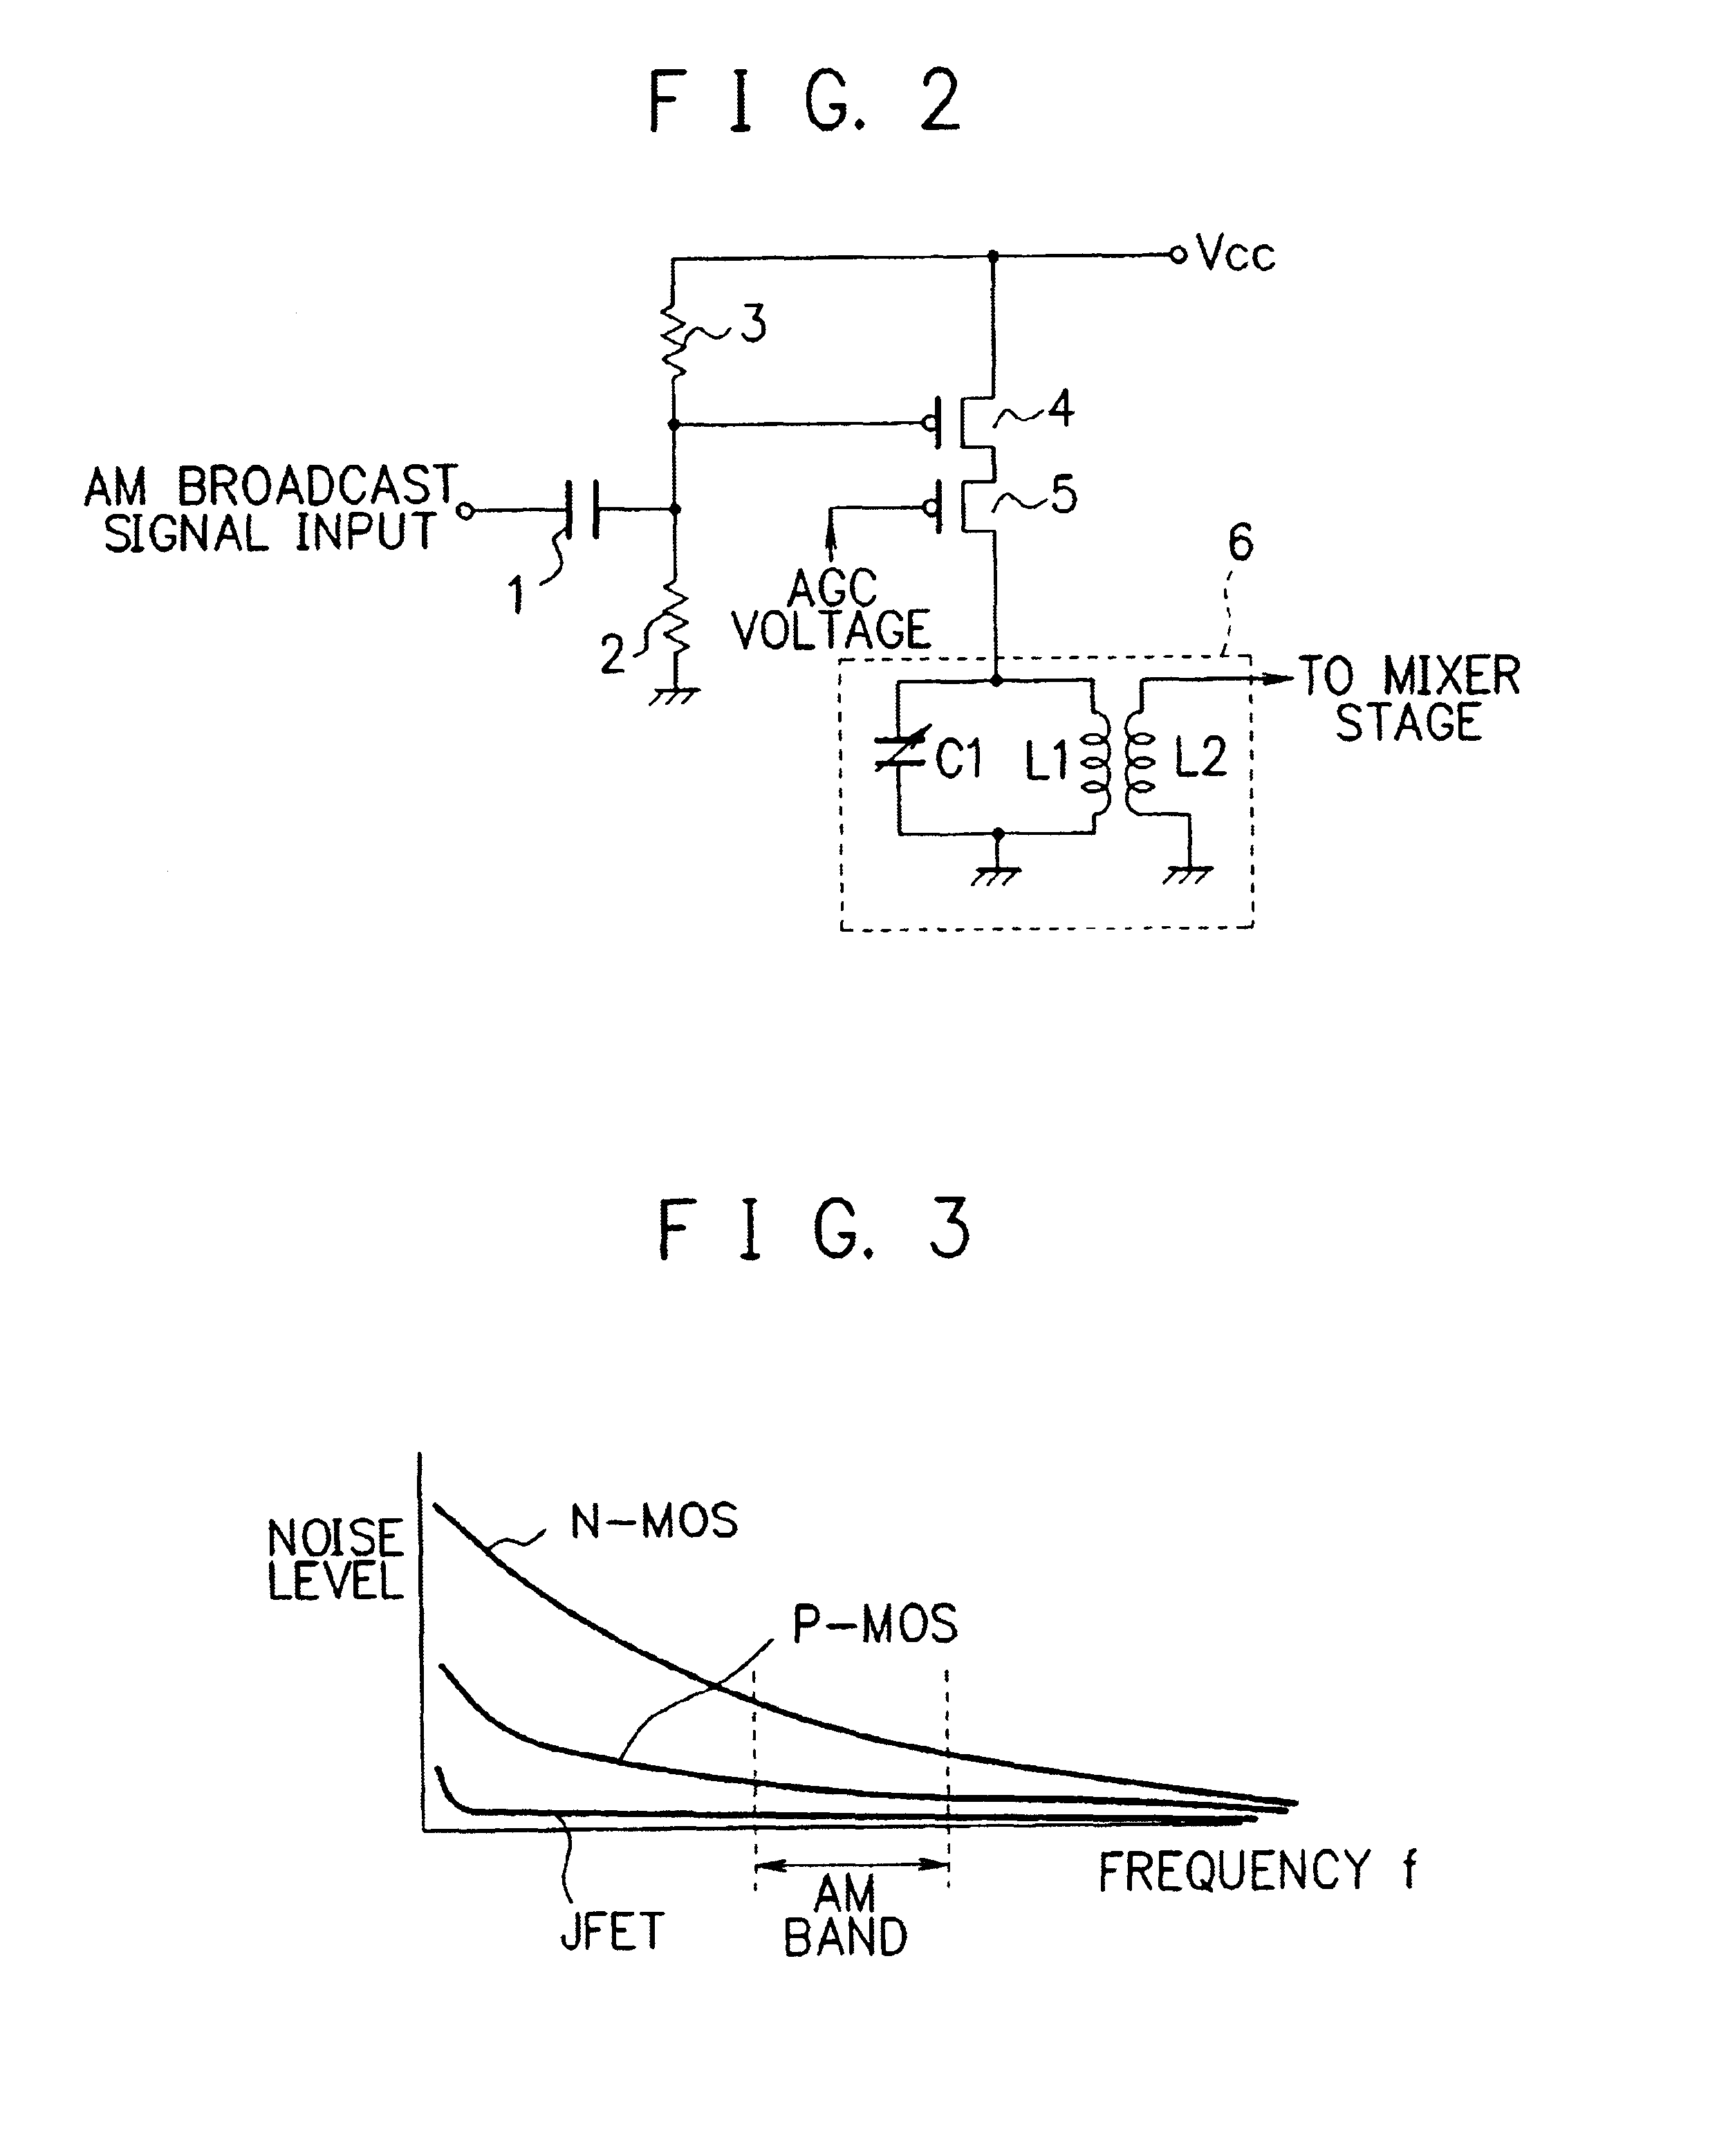 Amplifier circuit for AM broadcasting